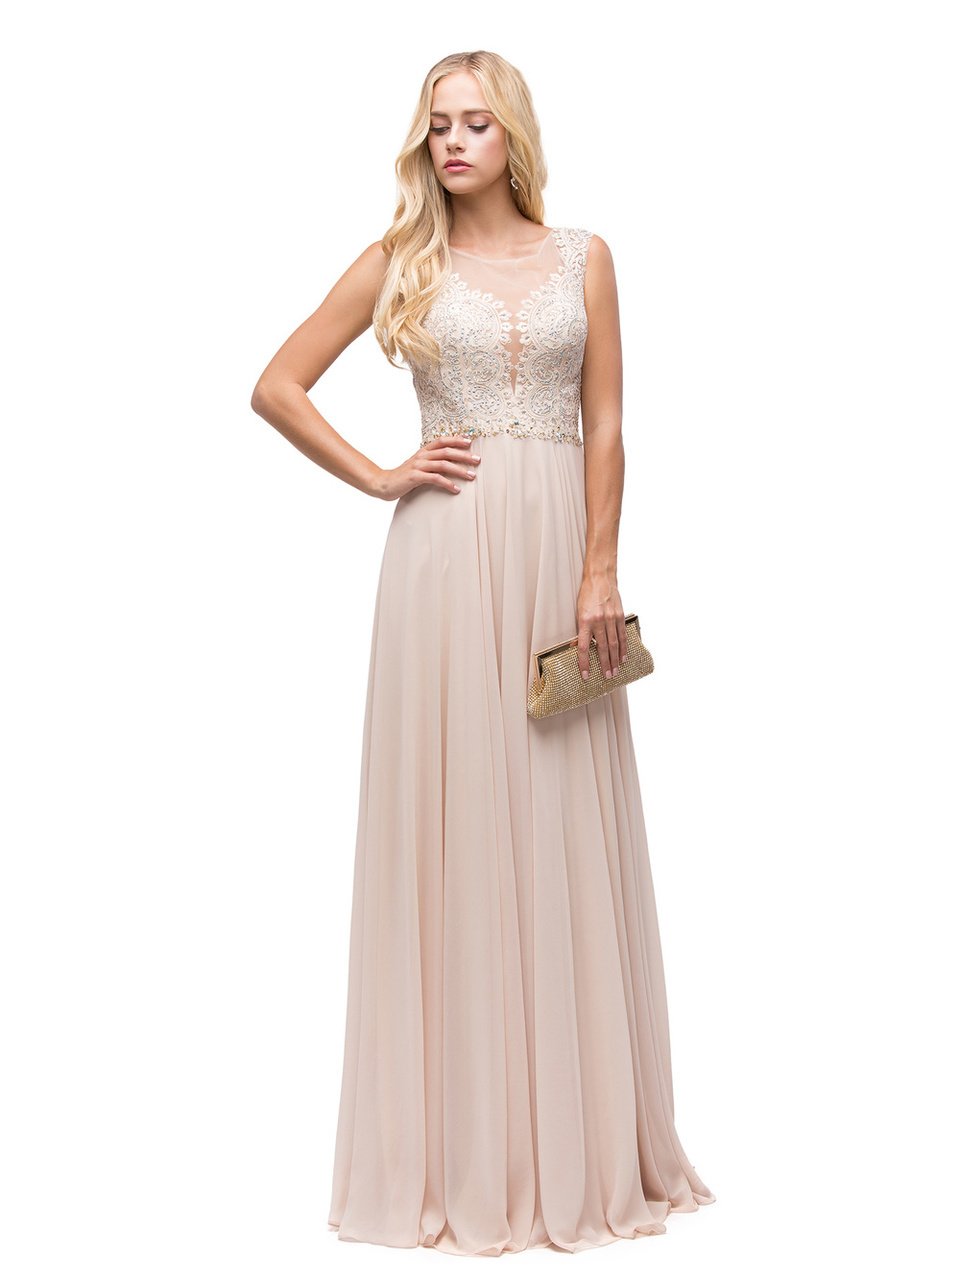 Dancing Queen Bridal - 9826 Gilded Lace Illusion A-Line Prom Dress Bridesmaid Dresses XS / Champagne